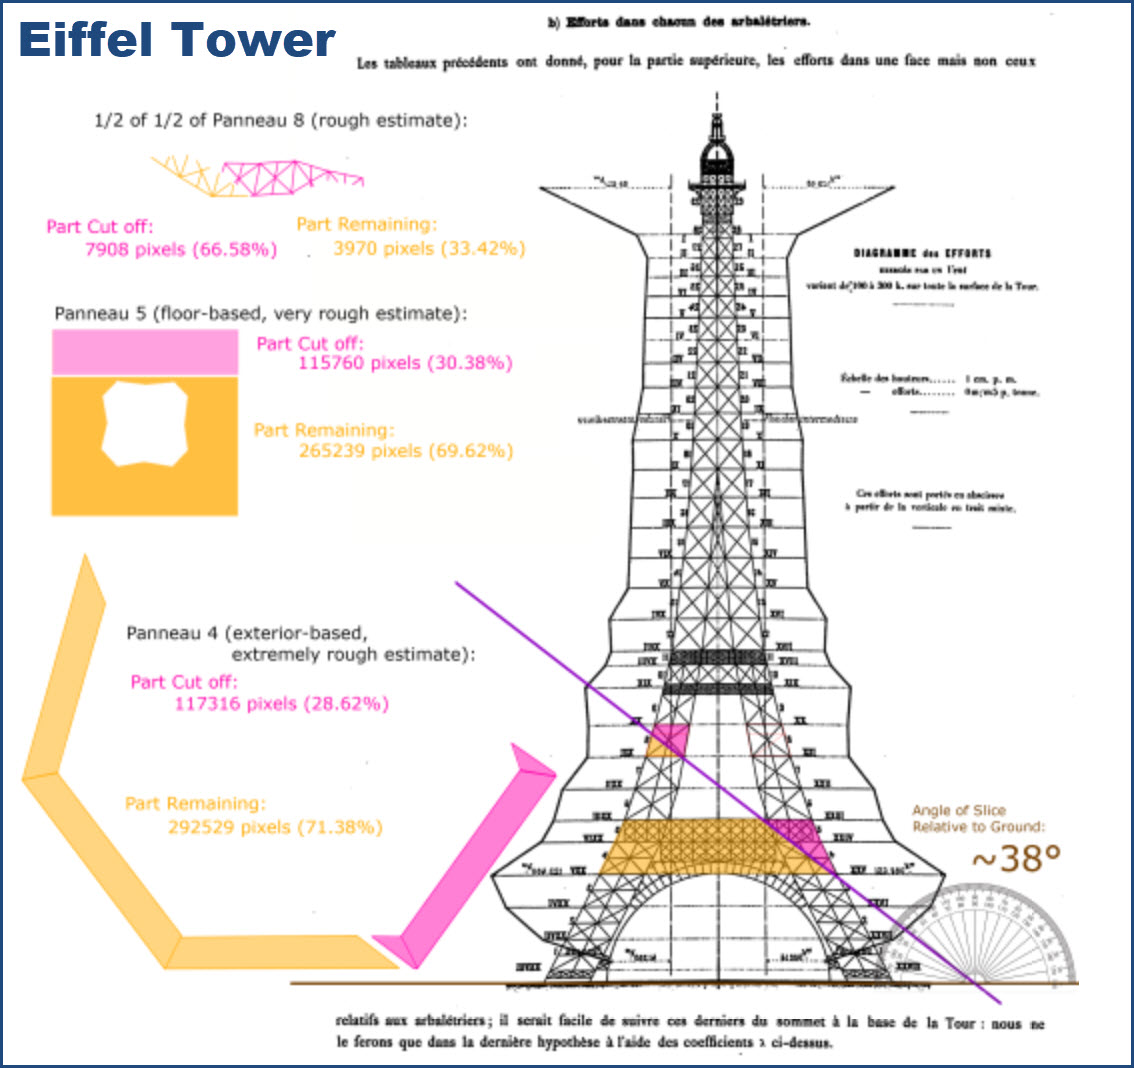 What does getting eiffel towered mean